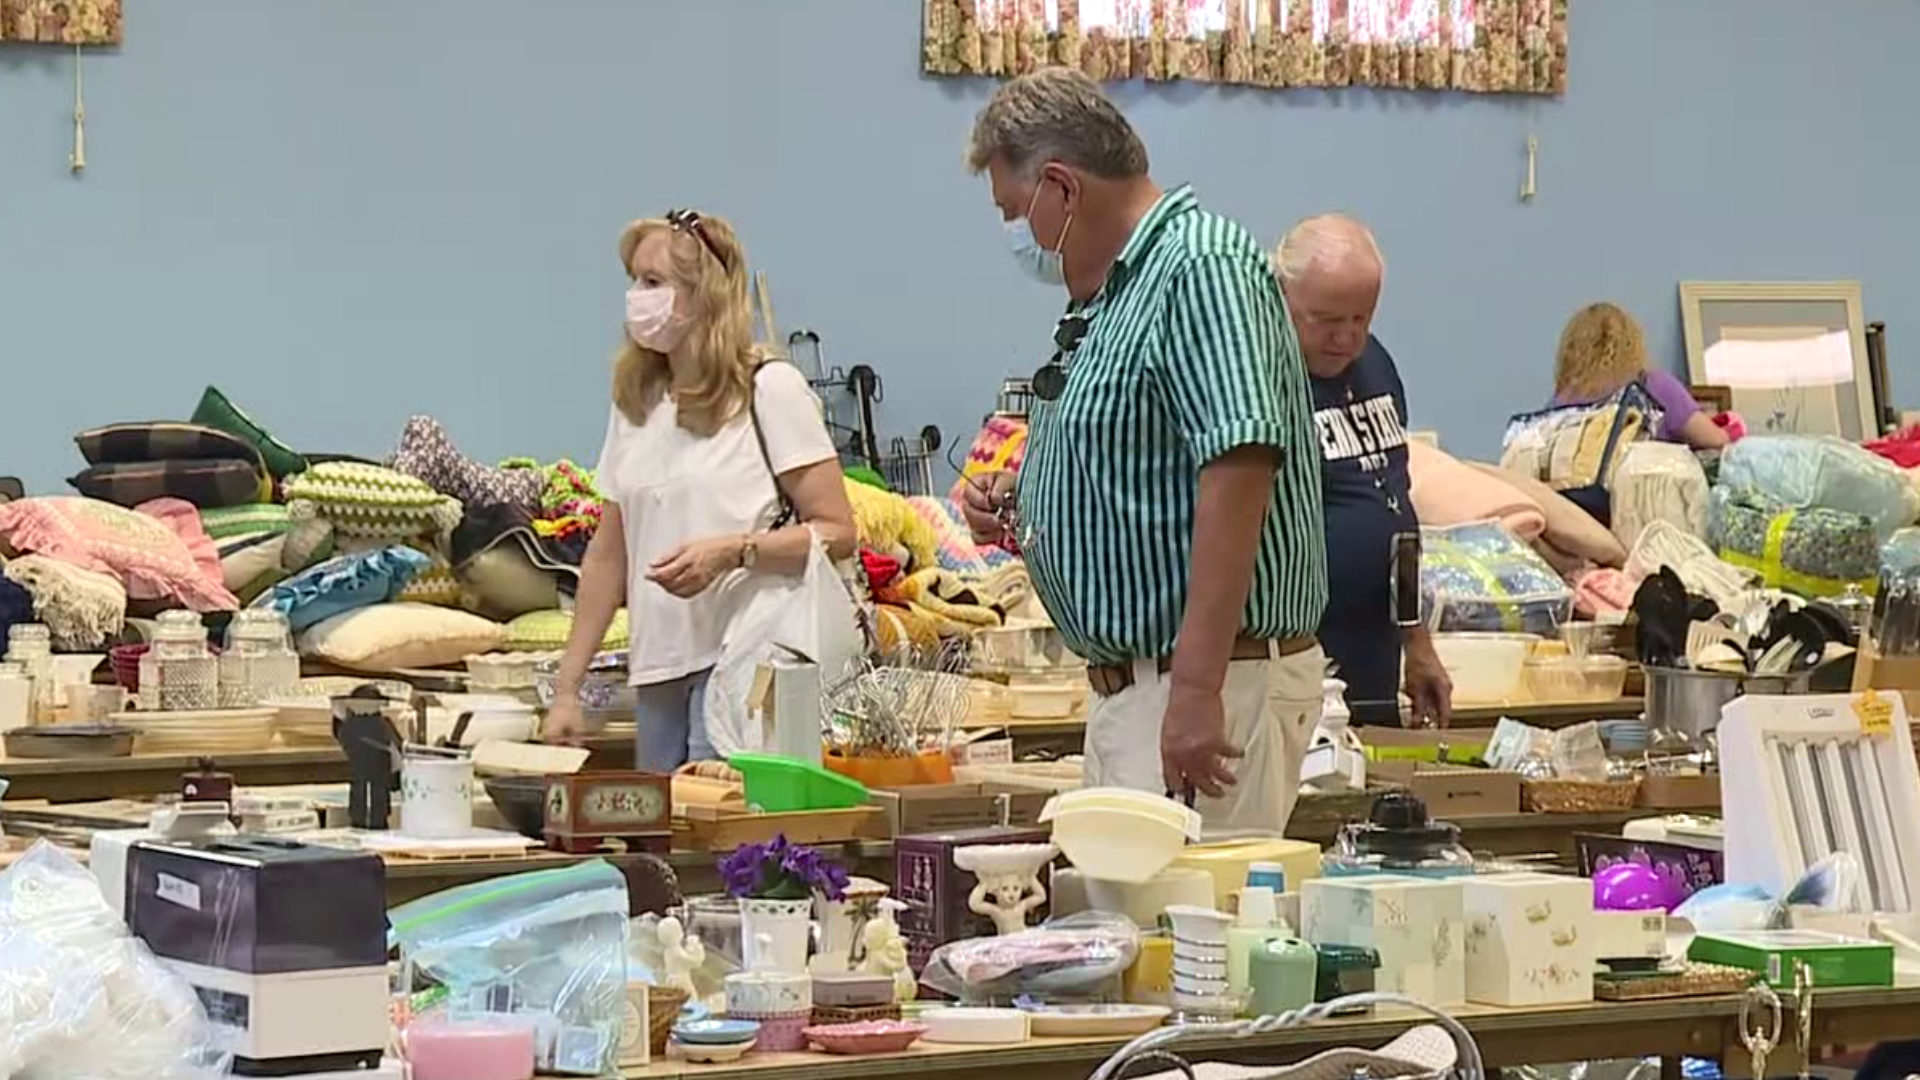 The church plans to use the money raised on Saturday for some much-needed upgrades.